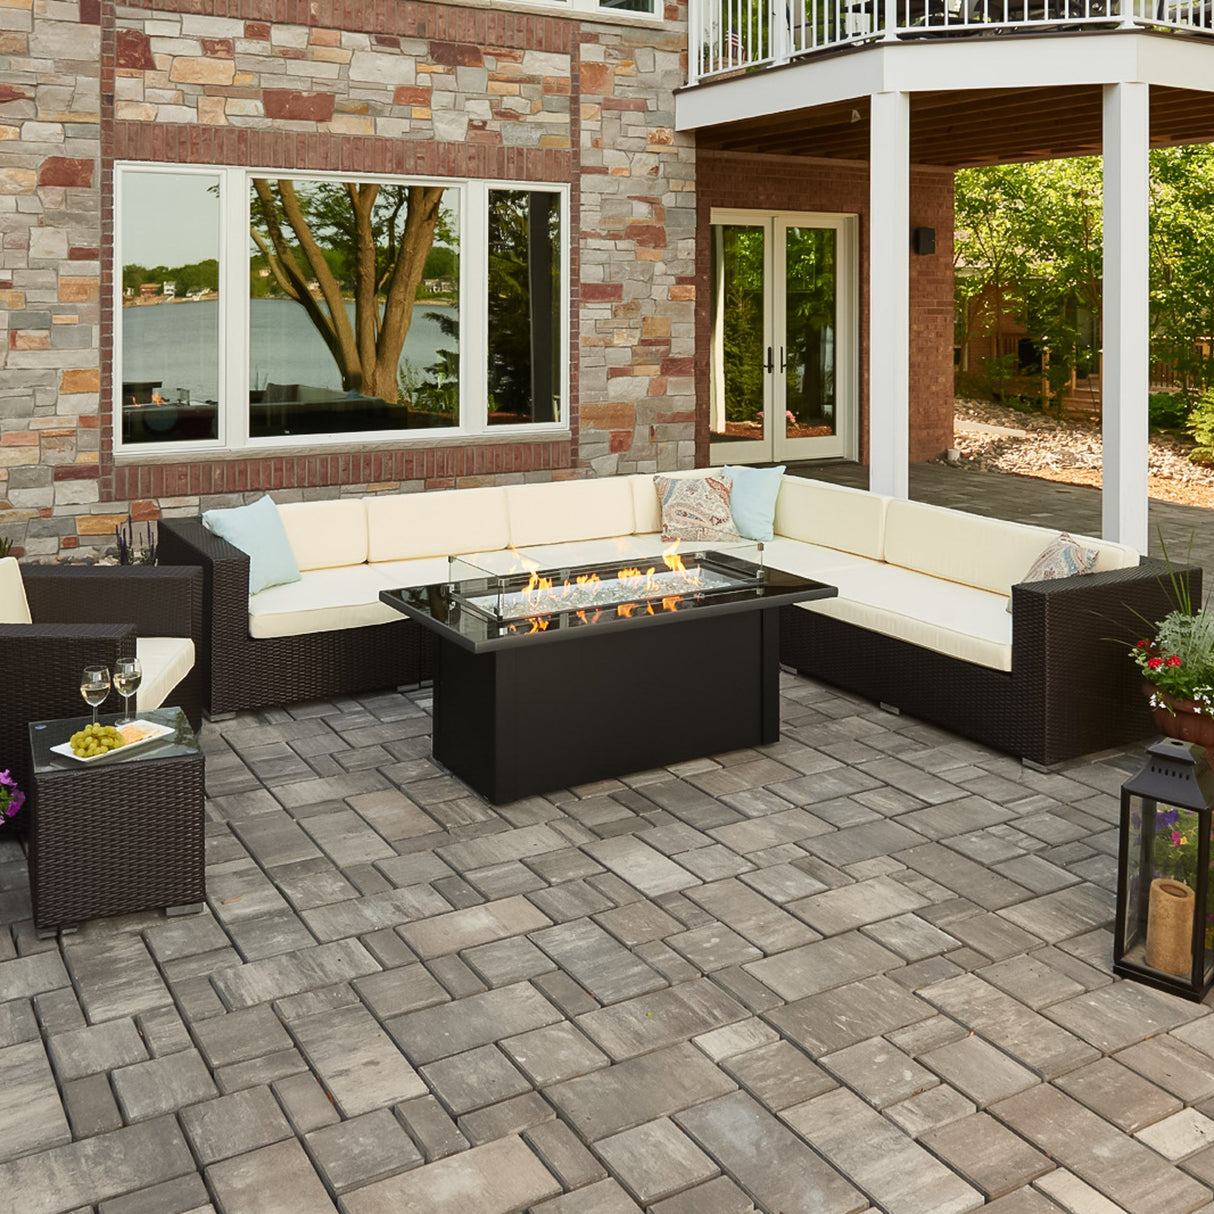 A patio that has a Monte Carlo Linear Gas Fire Pit Table, L-Shaped outdoor couch, and other decorations